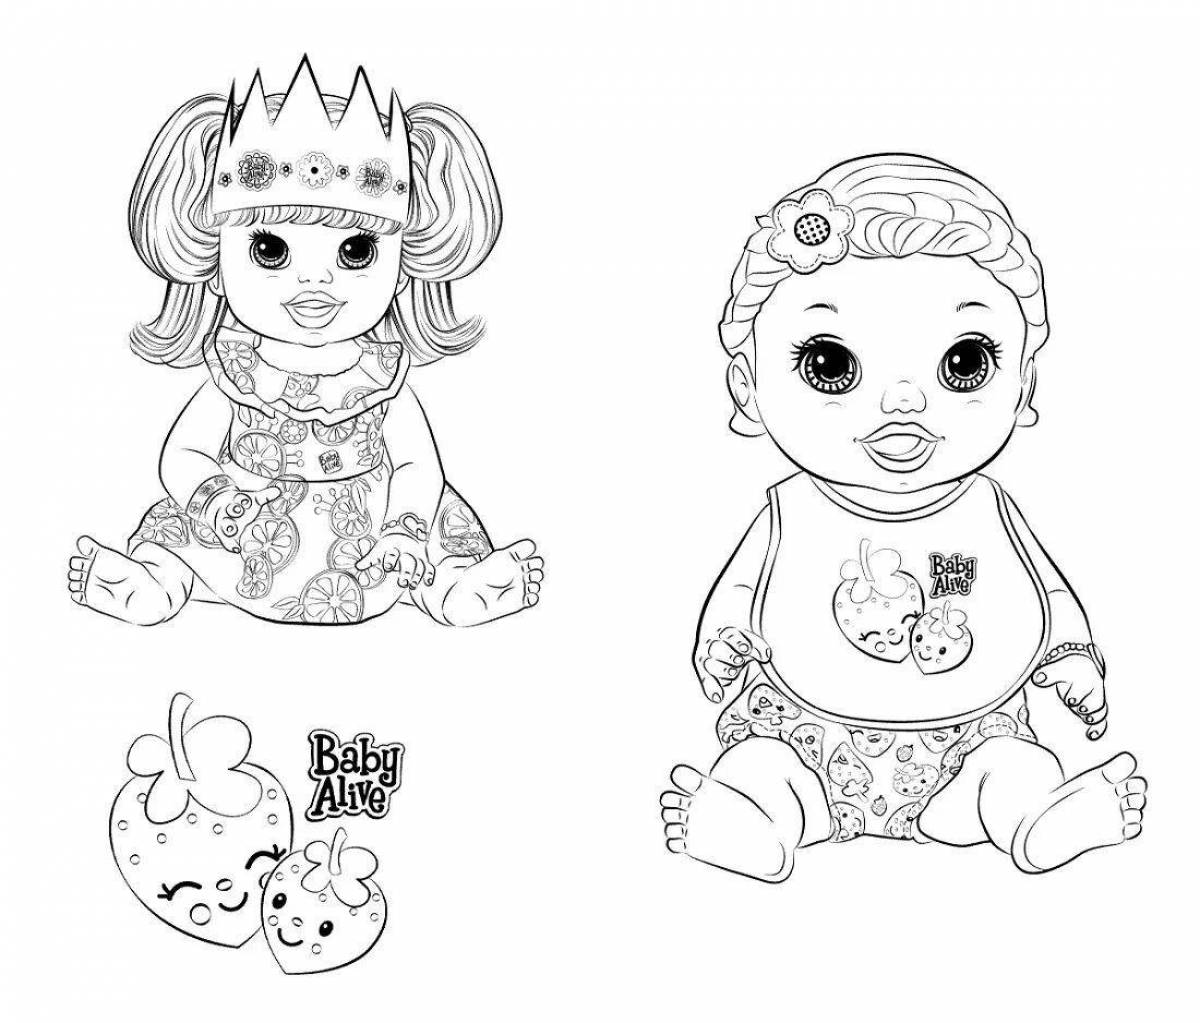 Coloring soft dolls for babies